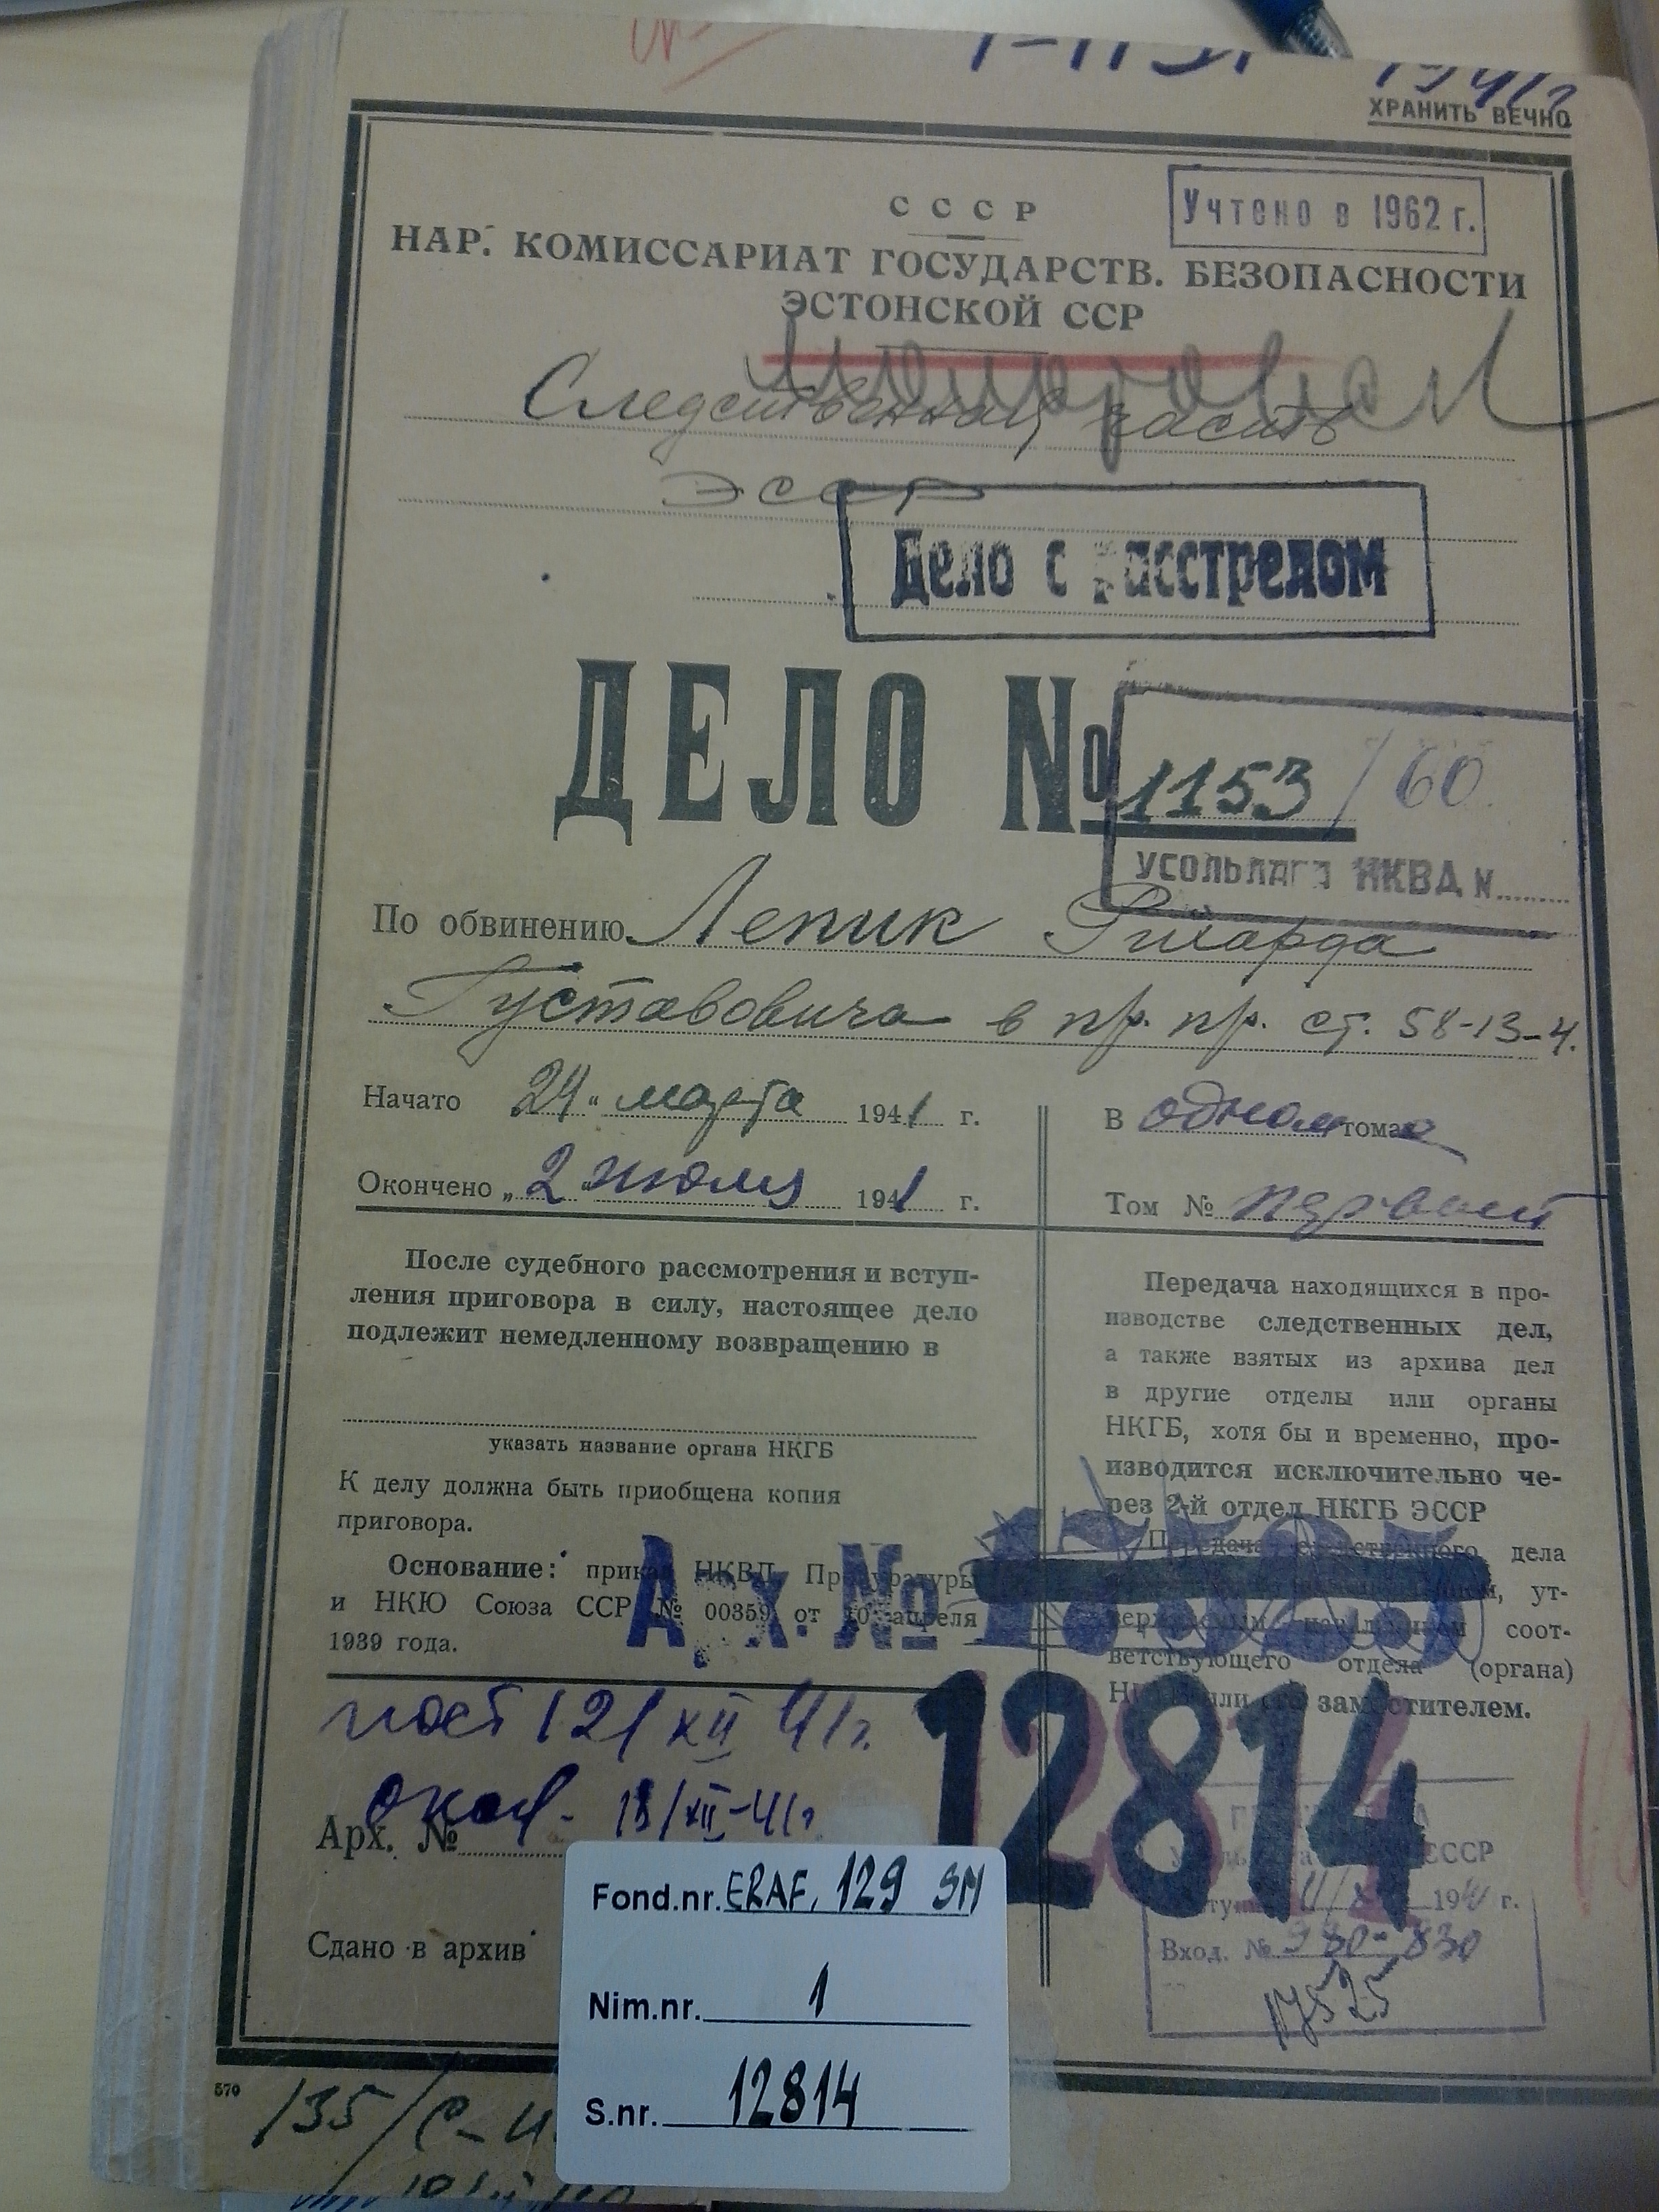 A typical front cover of a case file